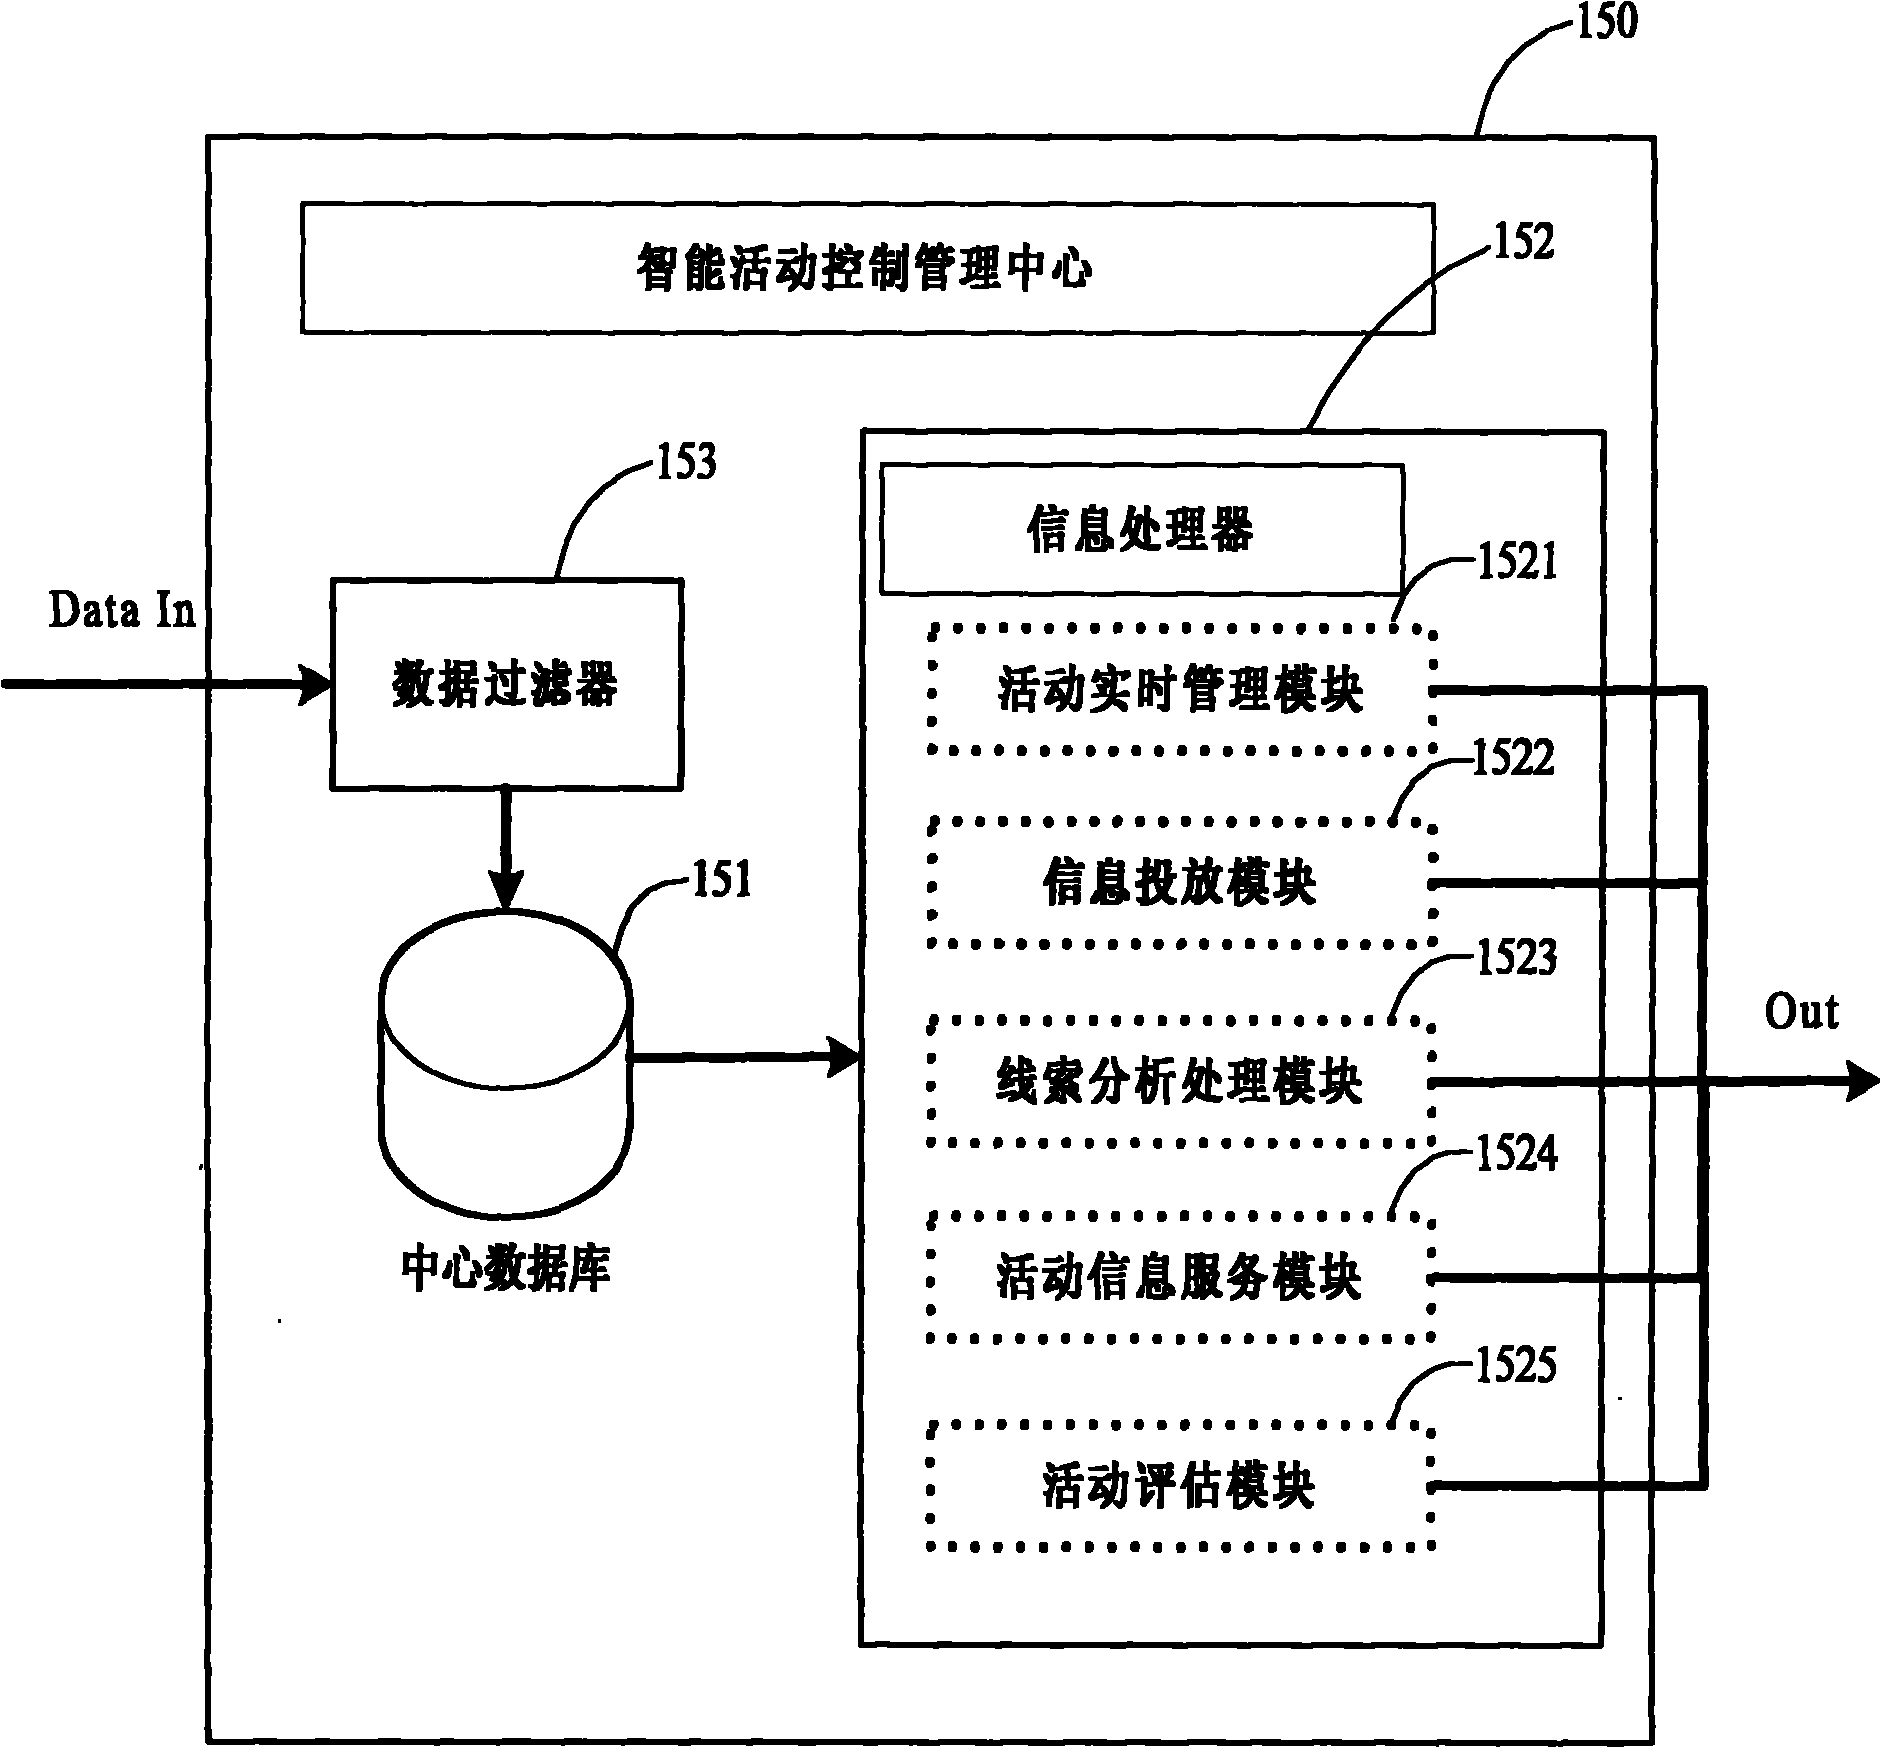 System and method for applying radio frequency identification tag in activity management